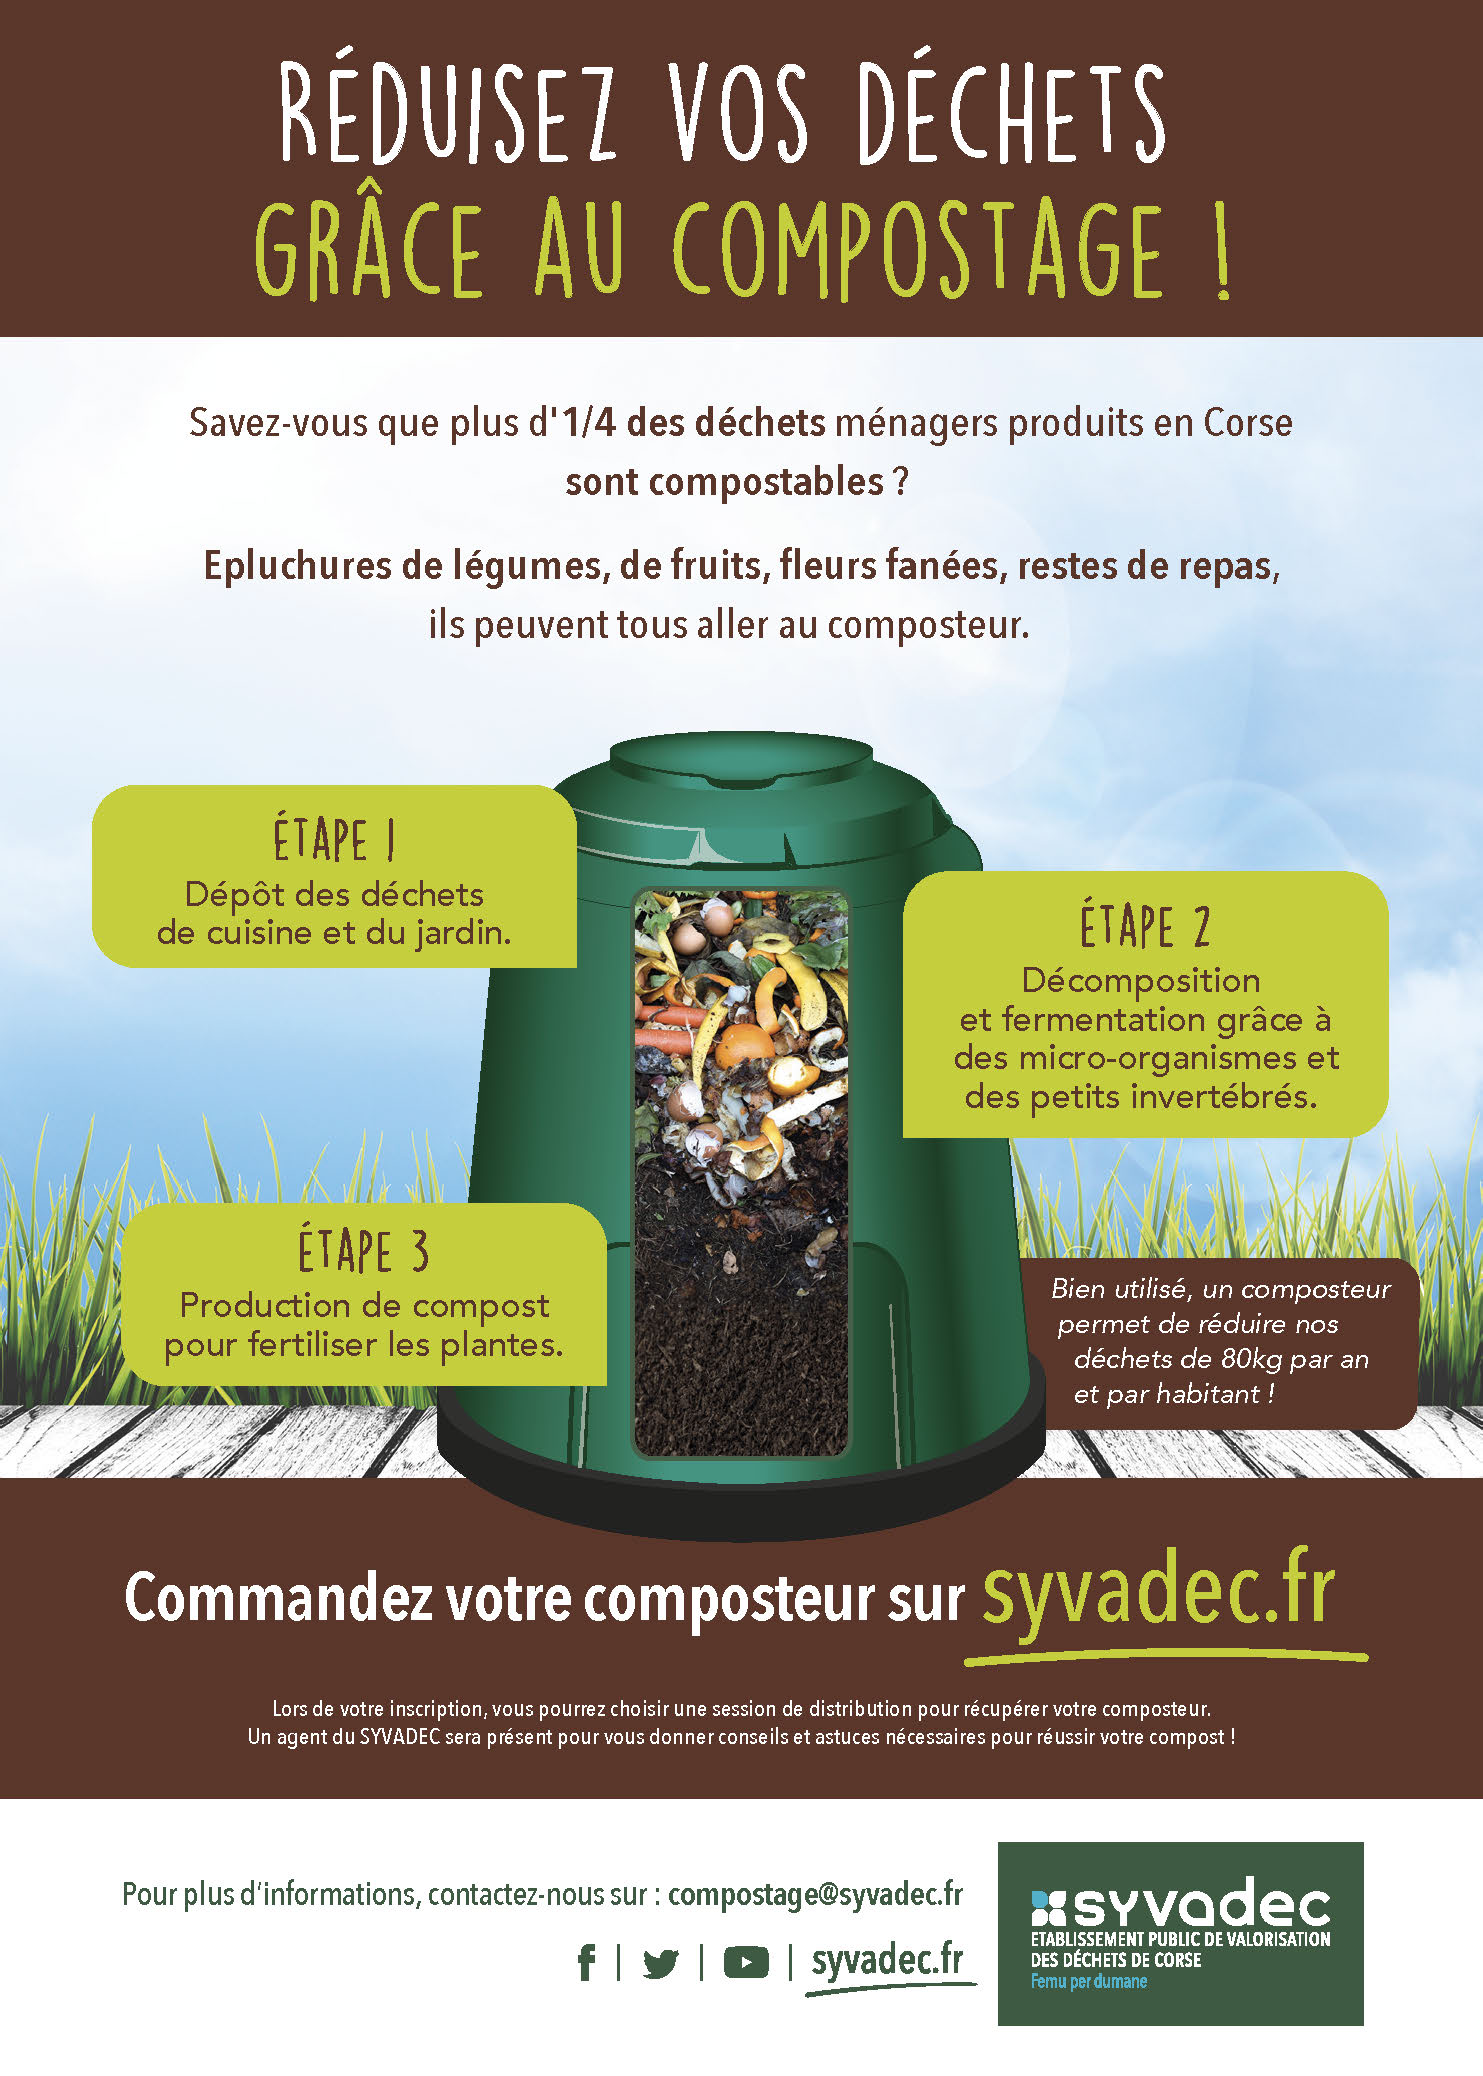 Le compostage individuel